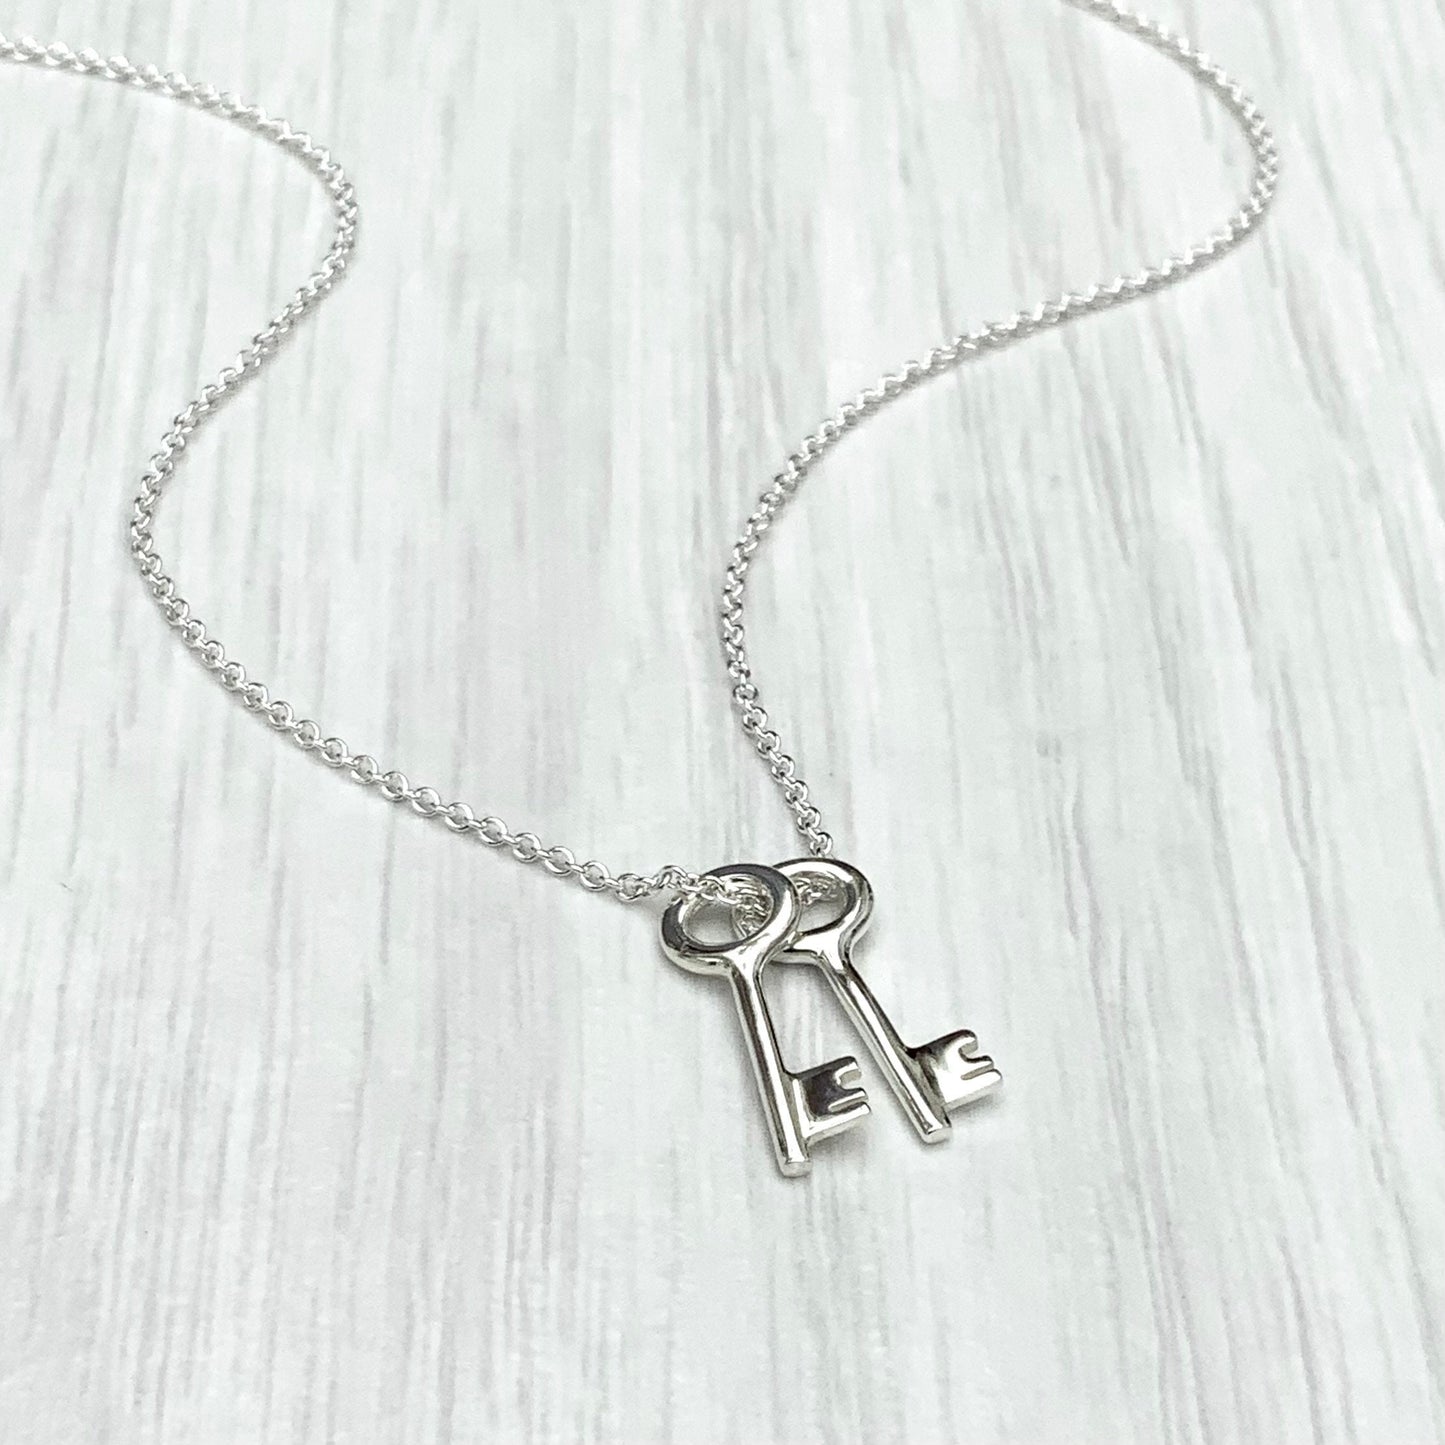 Solid silver small and dainty key charm pendants on a trace chain. A choice of one, two or three key pendants.